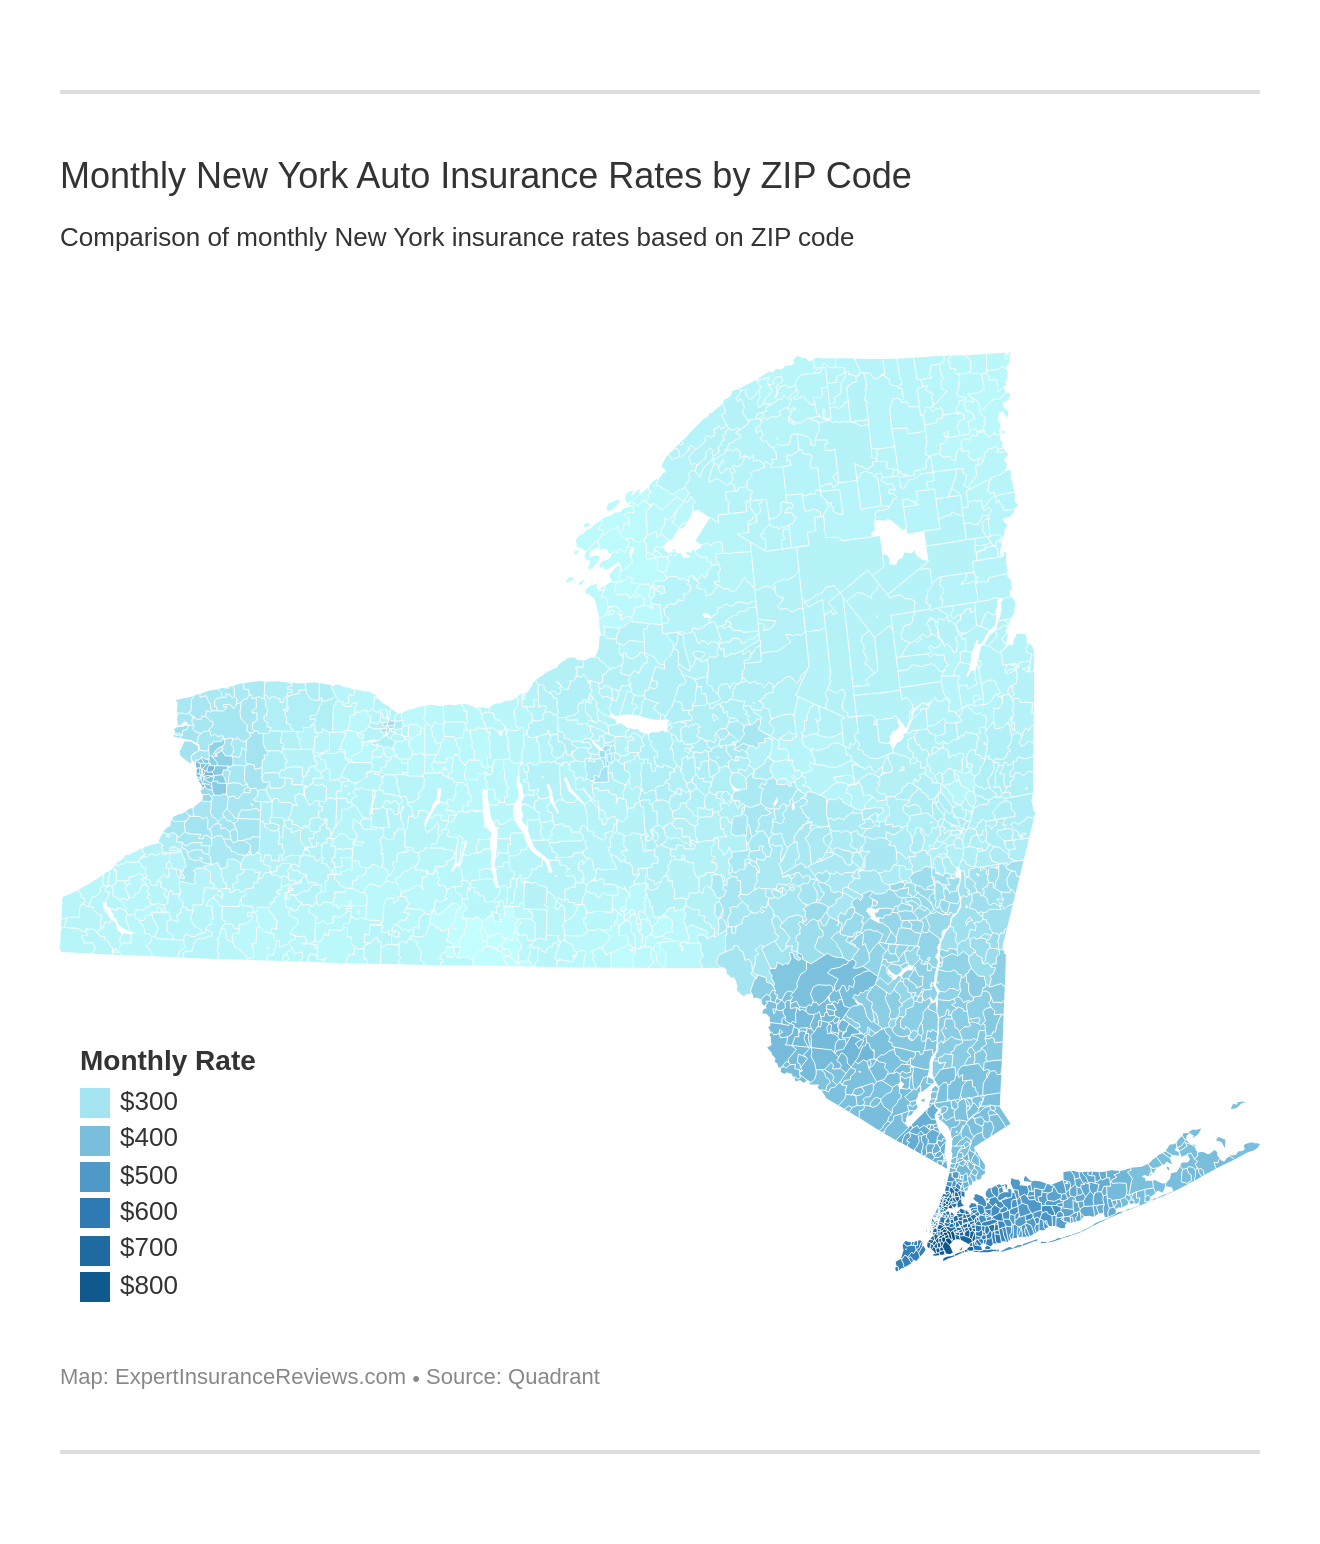 Monthly New York Auto Insurance Rates by ZIP Code